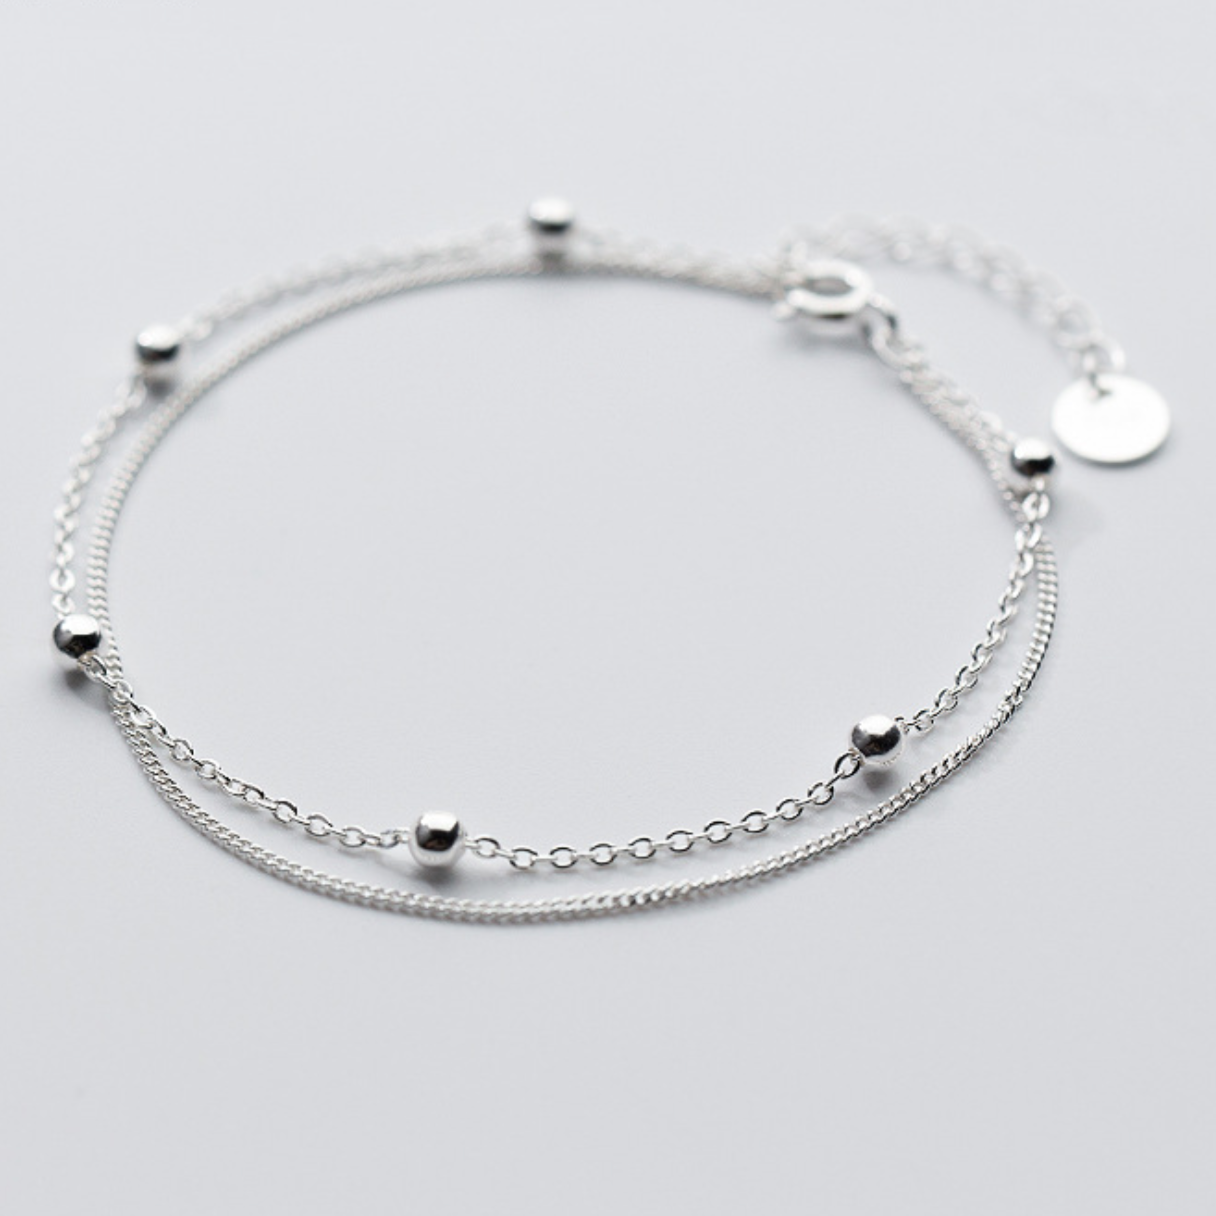 Masculine Elegance: Silver Chains for
Men’s Fashion